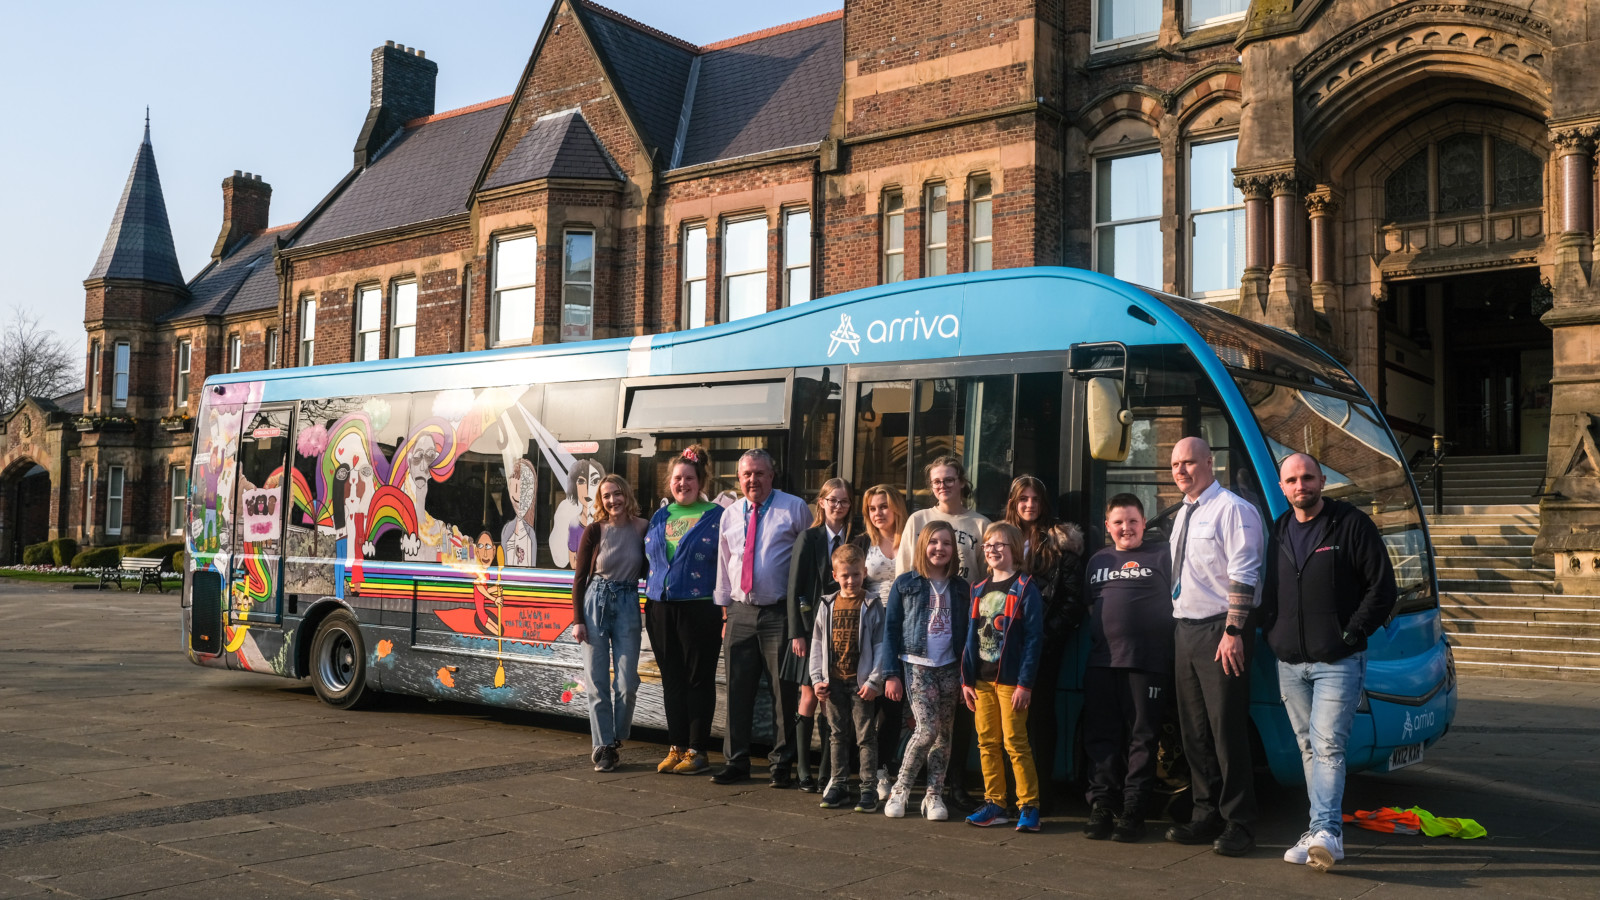 A group of people stand at the front end of an Arriva bus in front of St Helens town hall. The bus is decorated with brightly coloured illustrations. The evening light illuminates the bus.